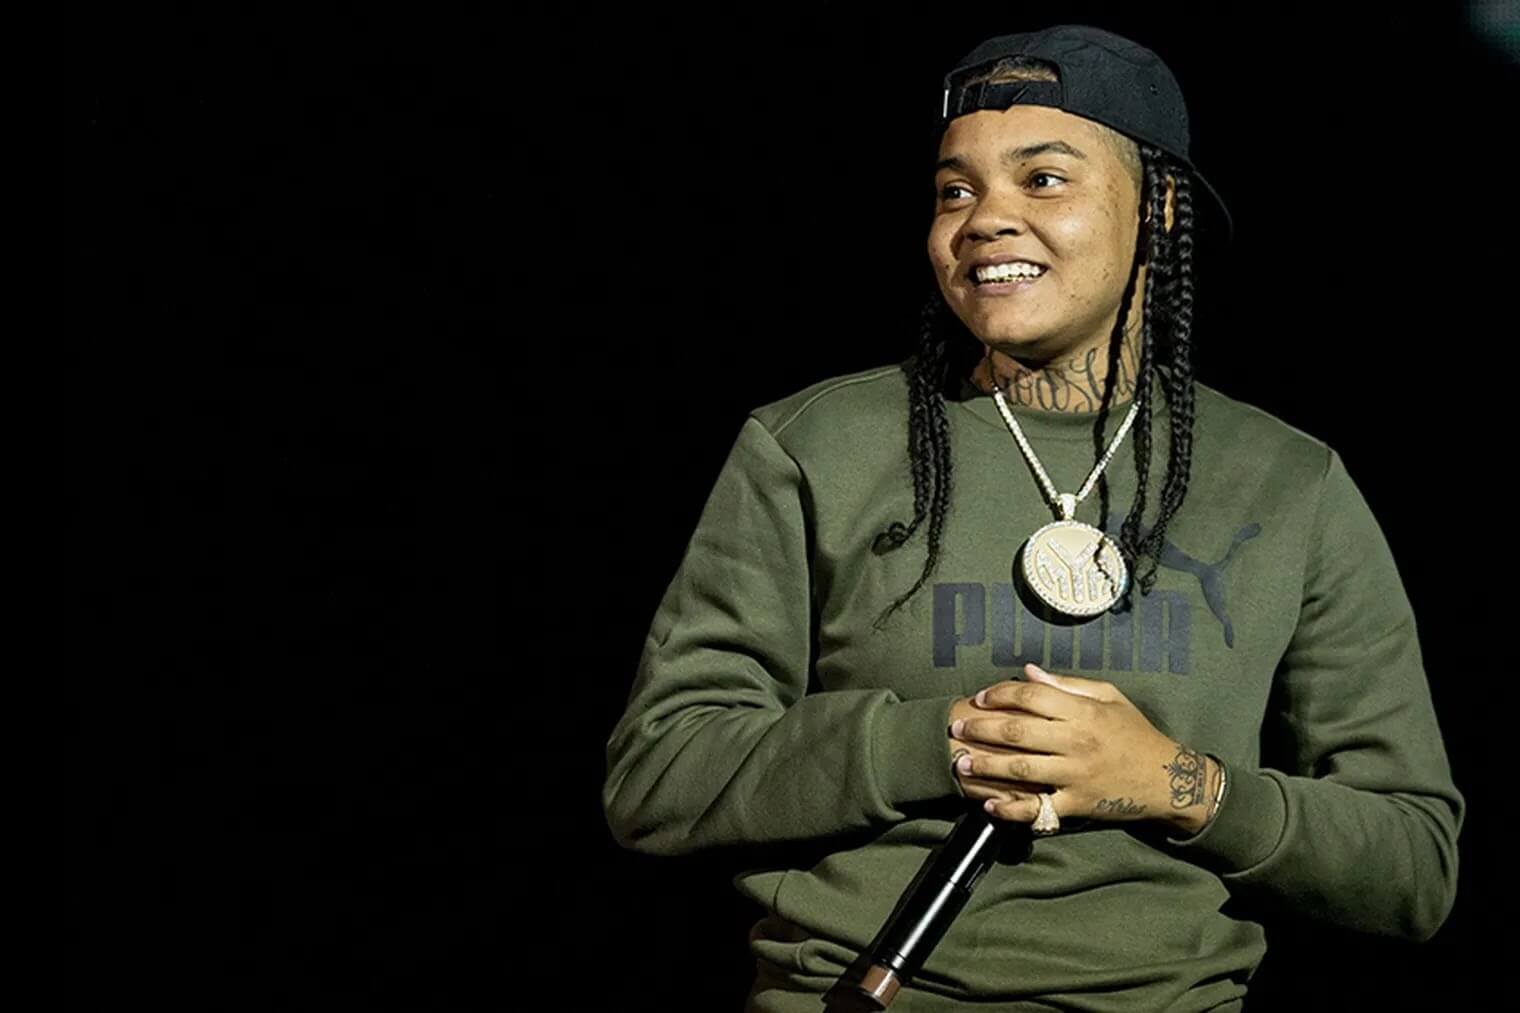 black gay music artist Young MA from Brooklyn,.  Since she got into the rap game which is filled with homophobes she's been open with her sexuality.